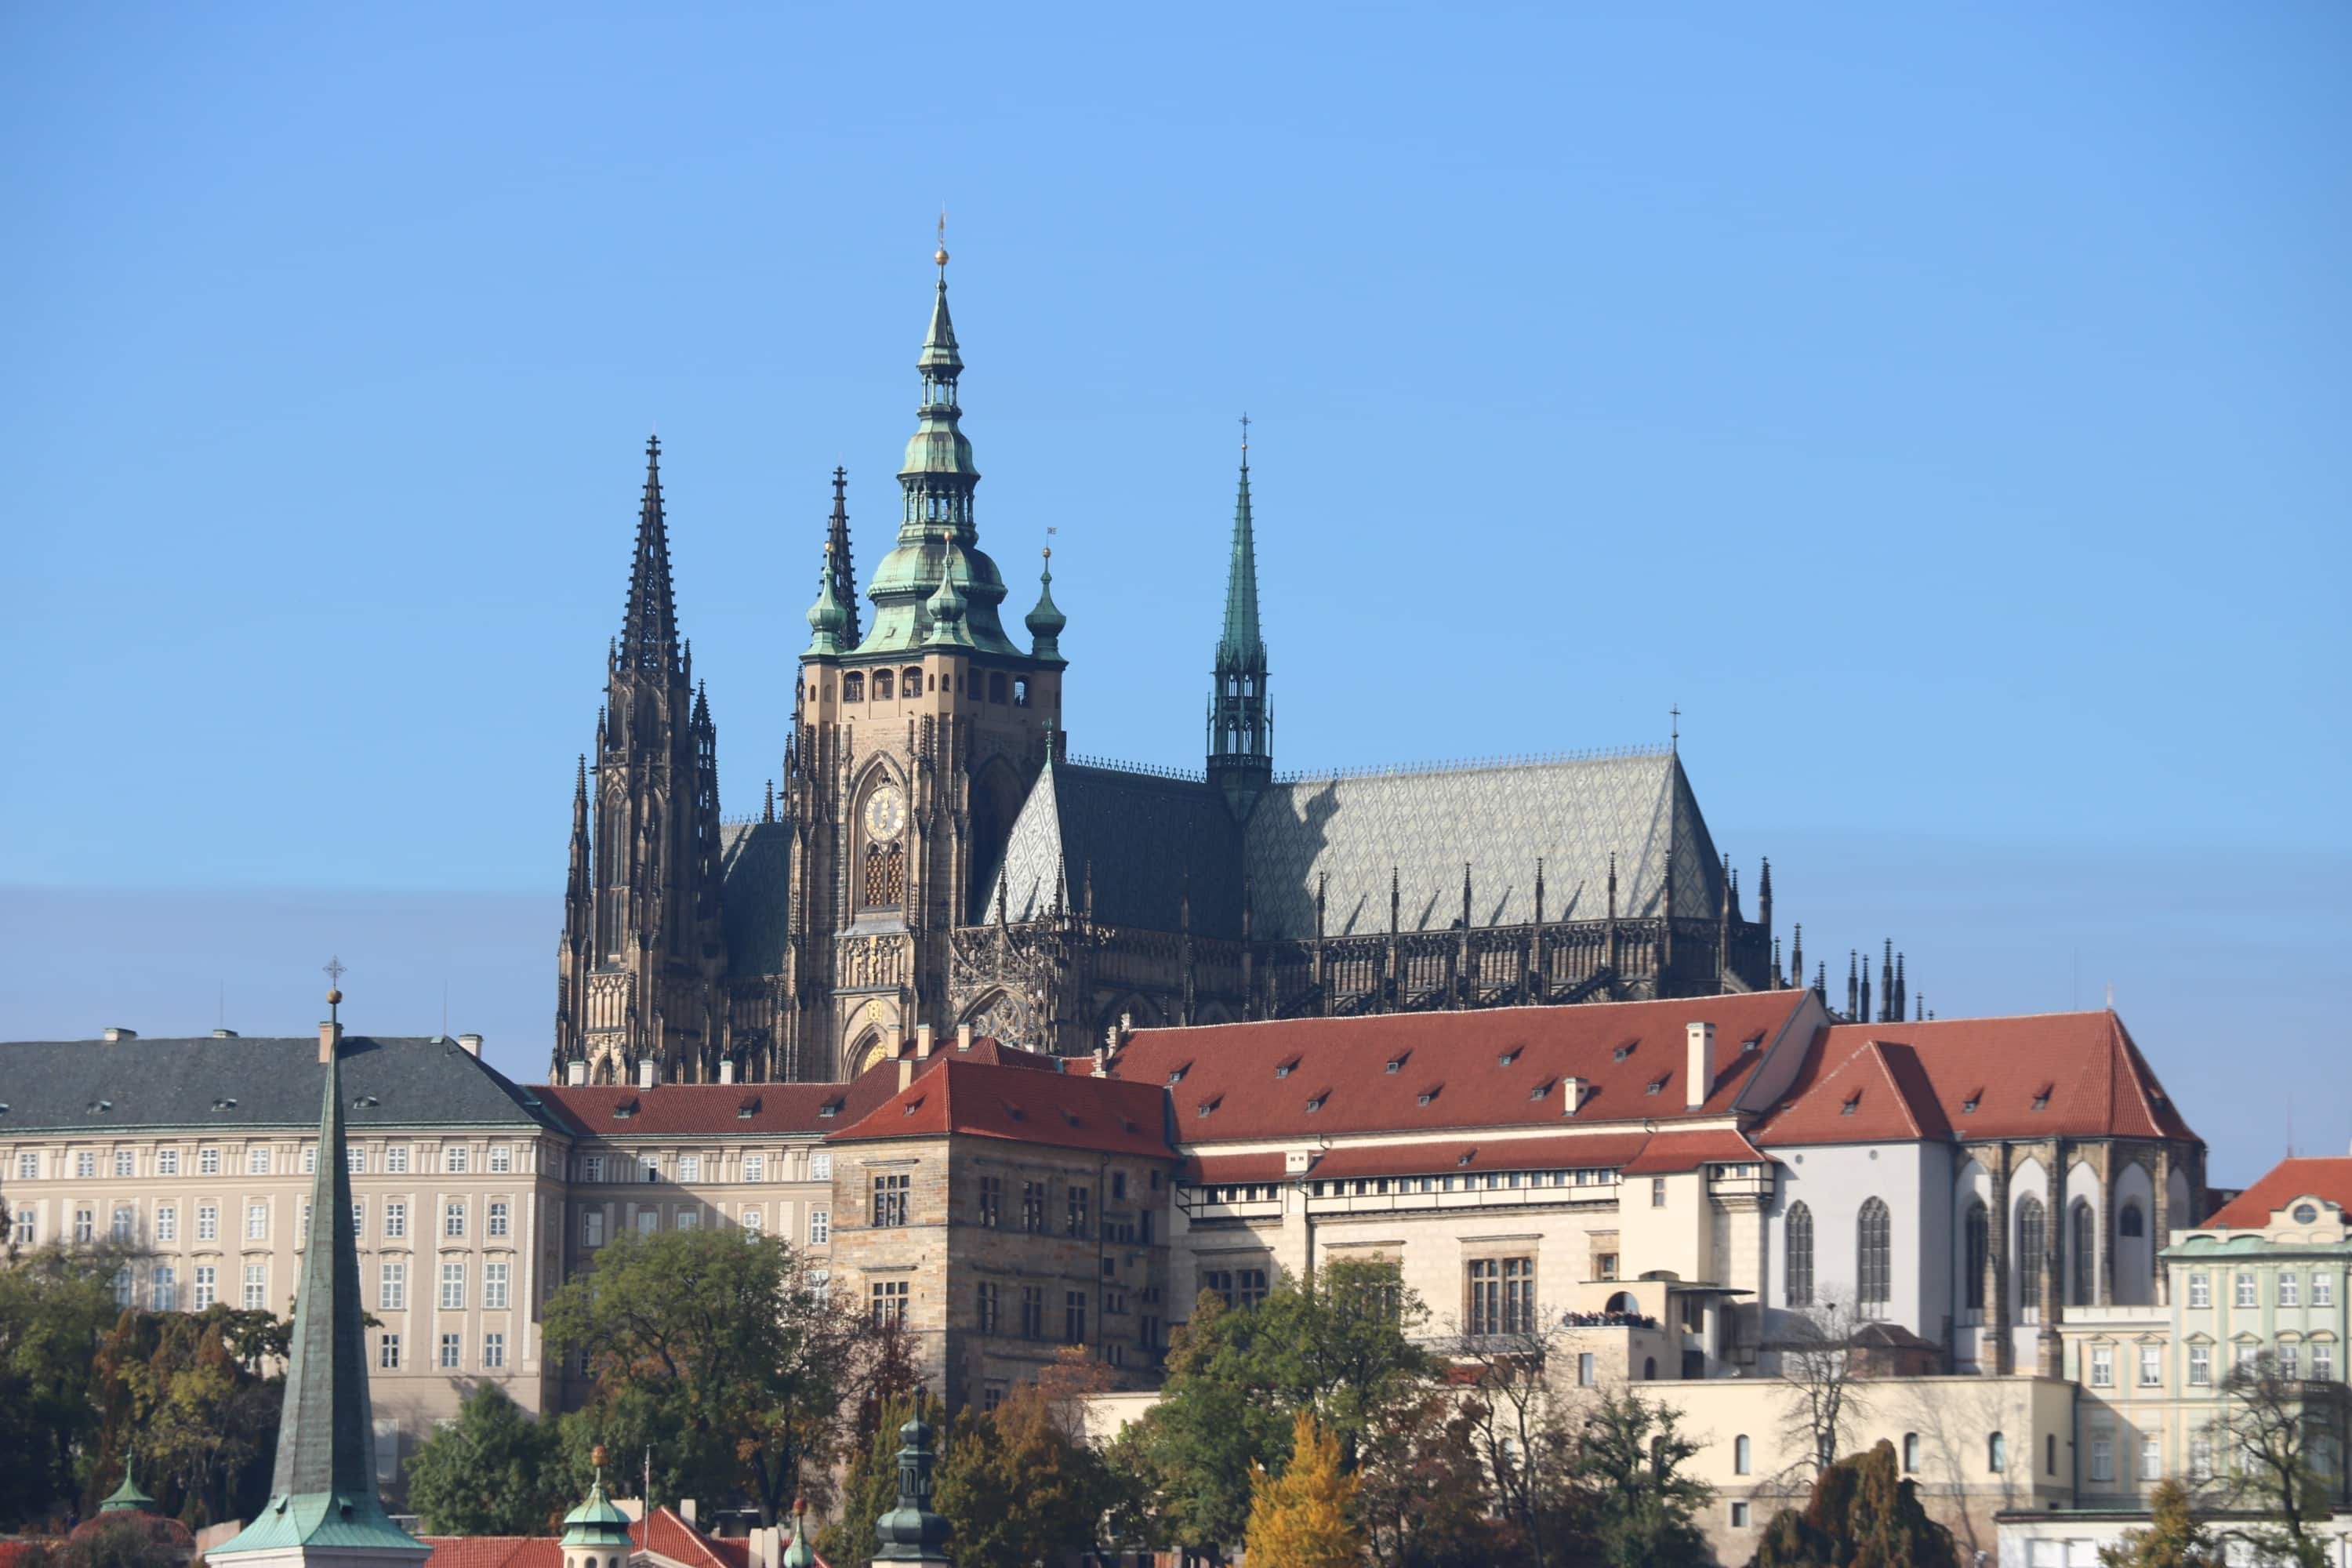 The gothic spires of the St Vitus Cathedral in Prague